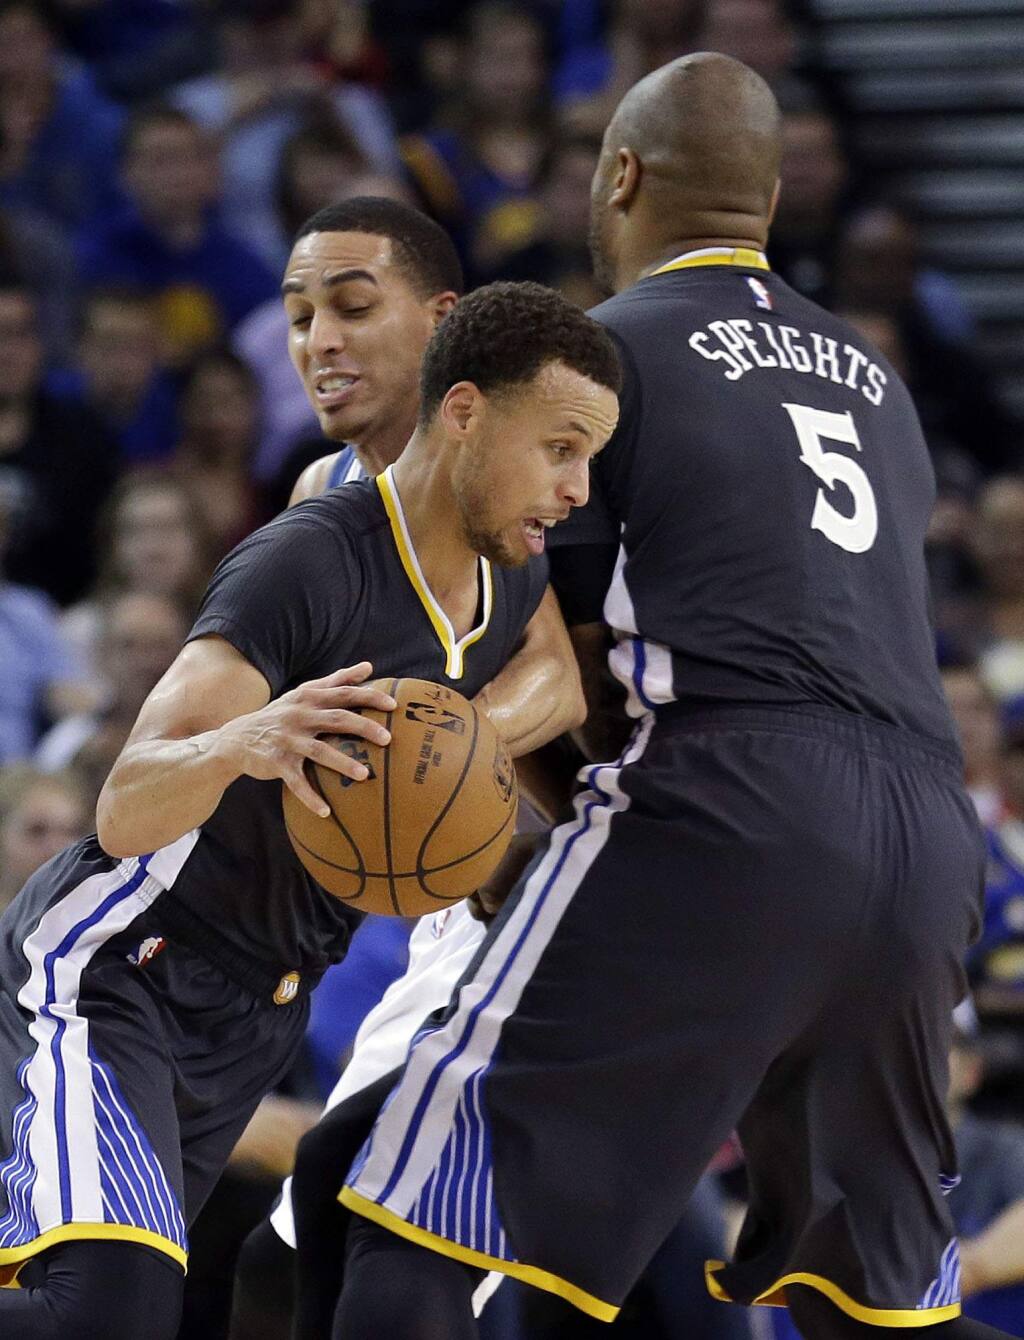 NBA: Steph Curry sends another three-point record tumbling